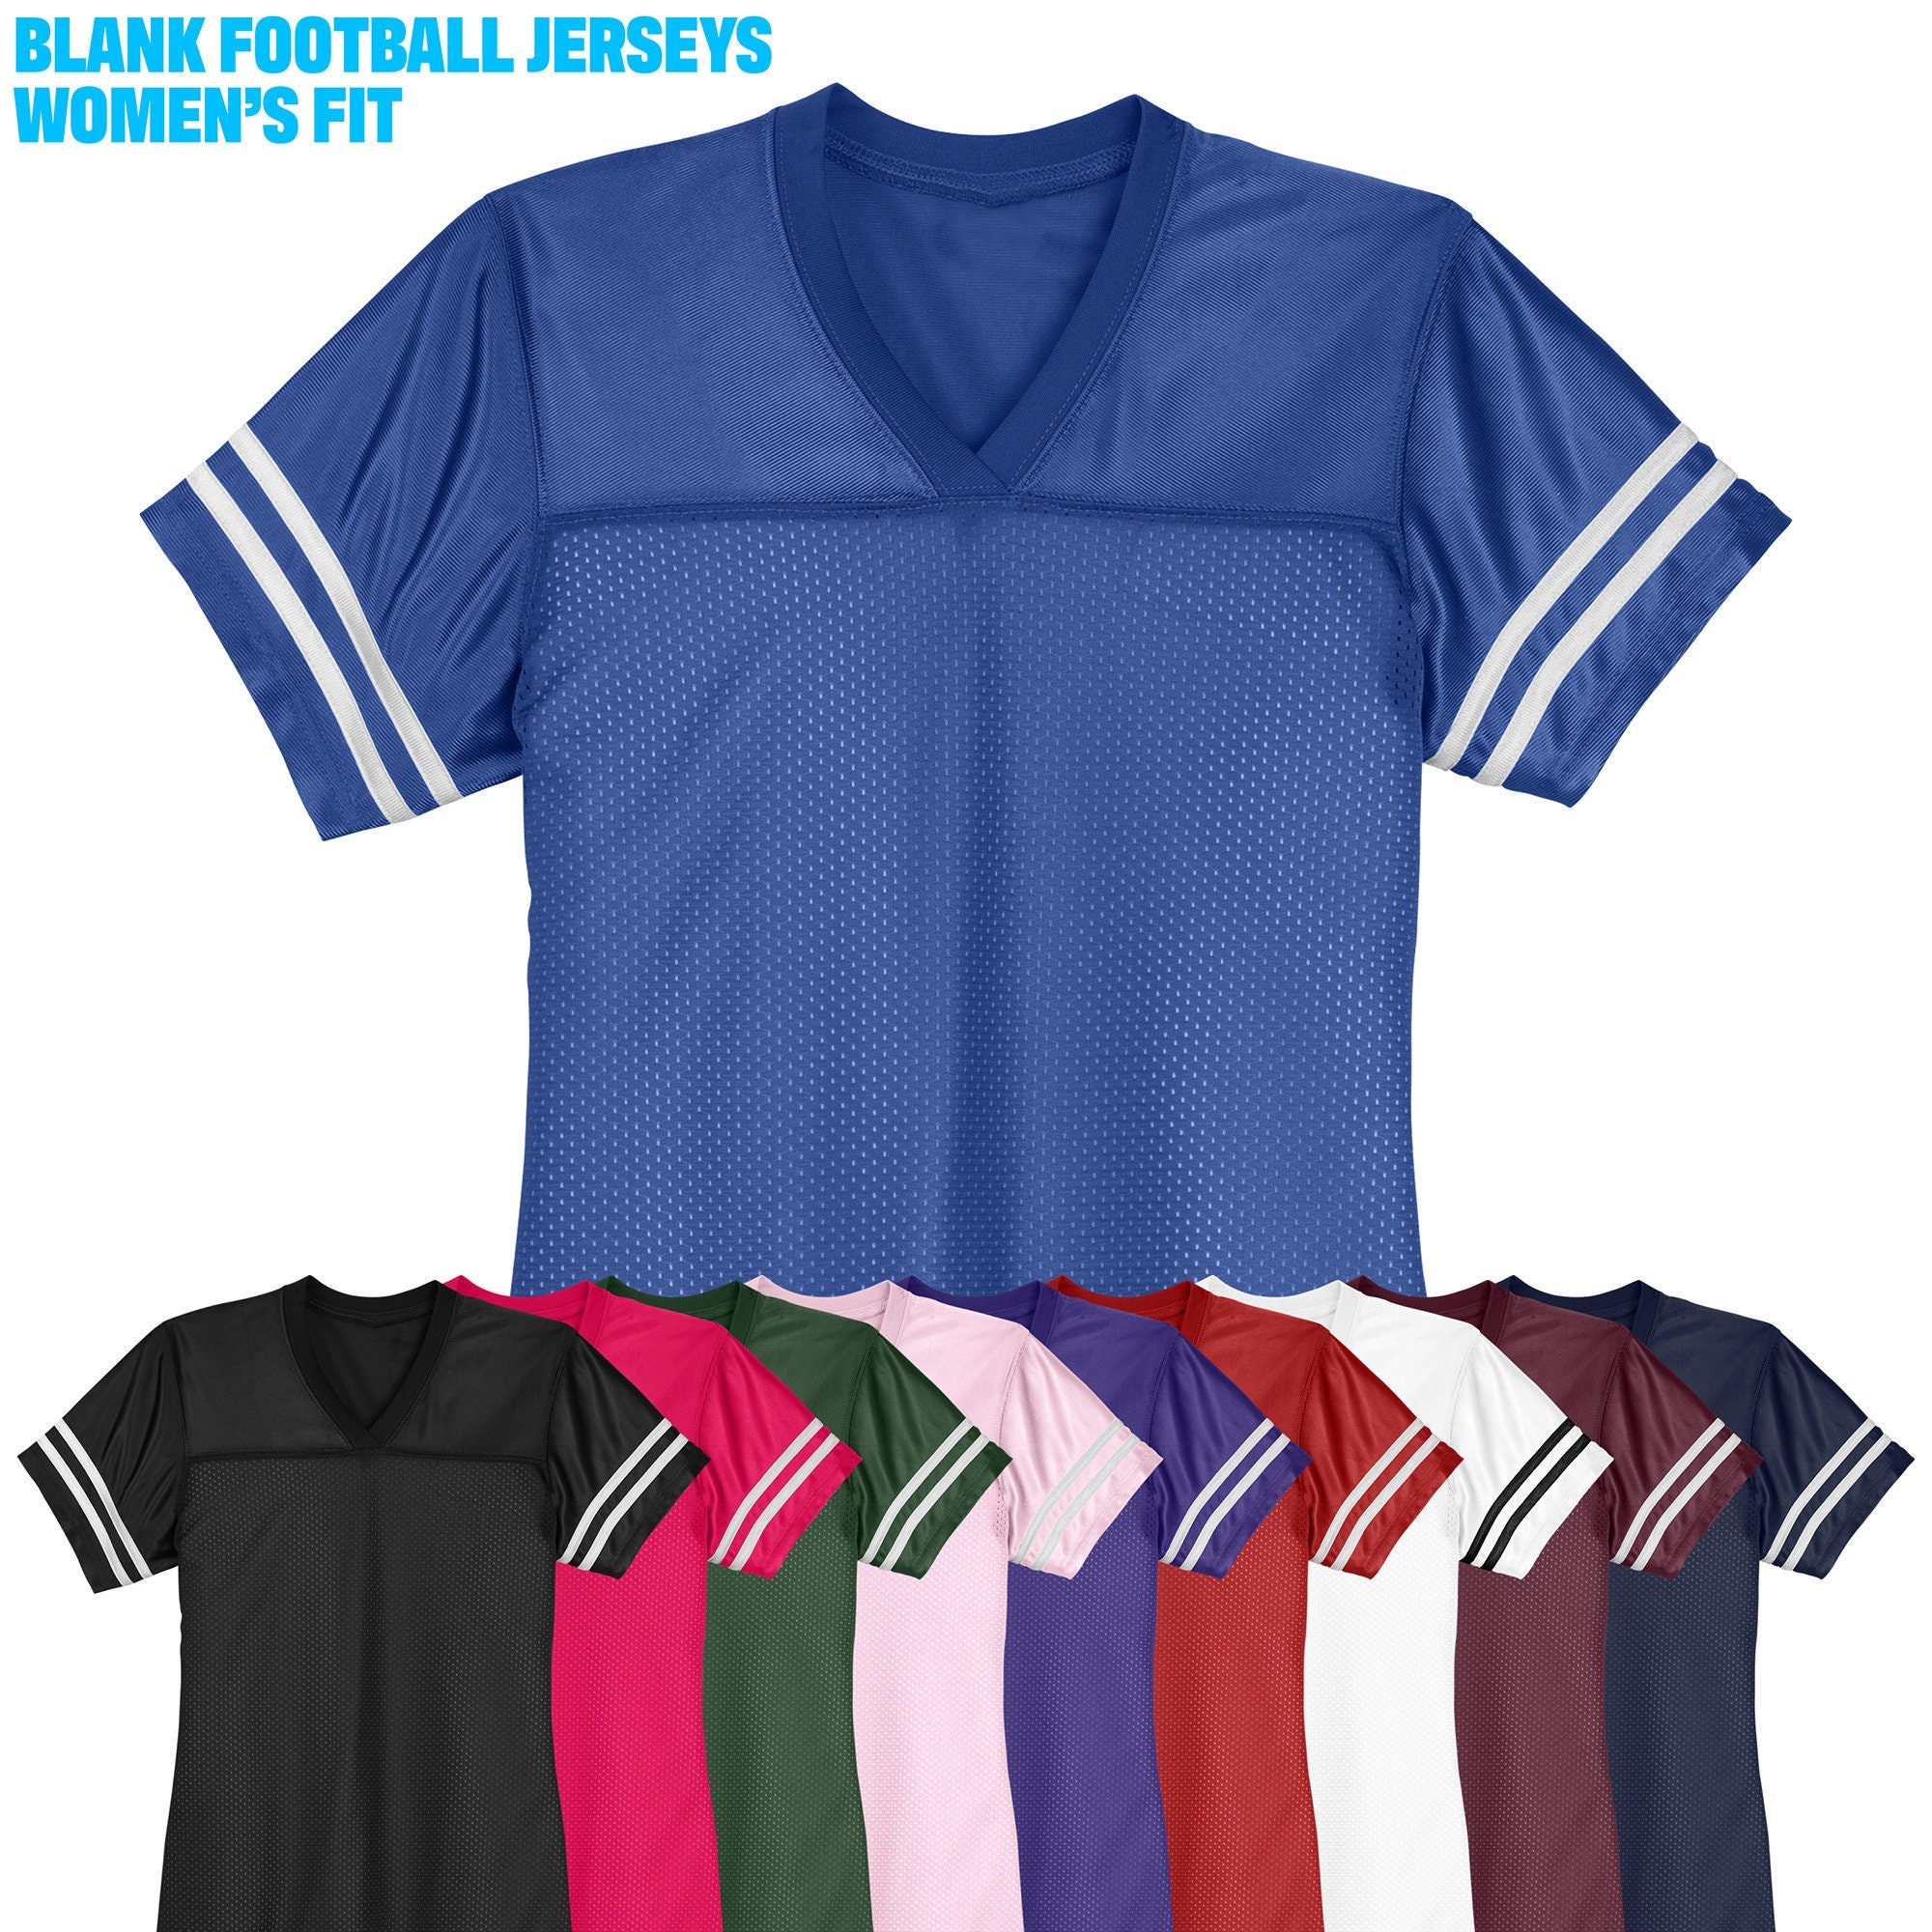 Women's Blank Football Jerseys - Mesh Jersey - Ready to Decorate - HTV  Supplies - Printing - Supplies - Team Uniforms - Jersey for Ladies